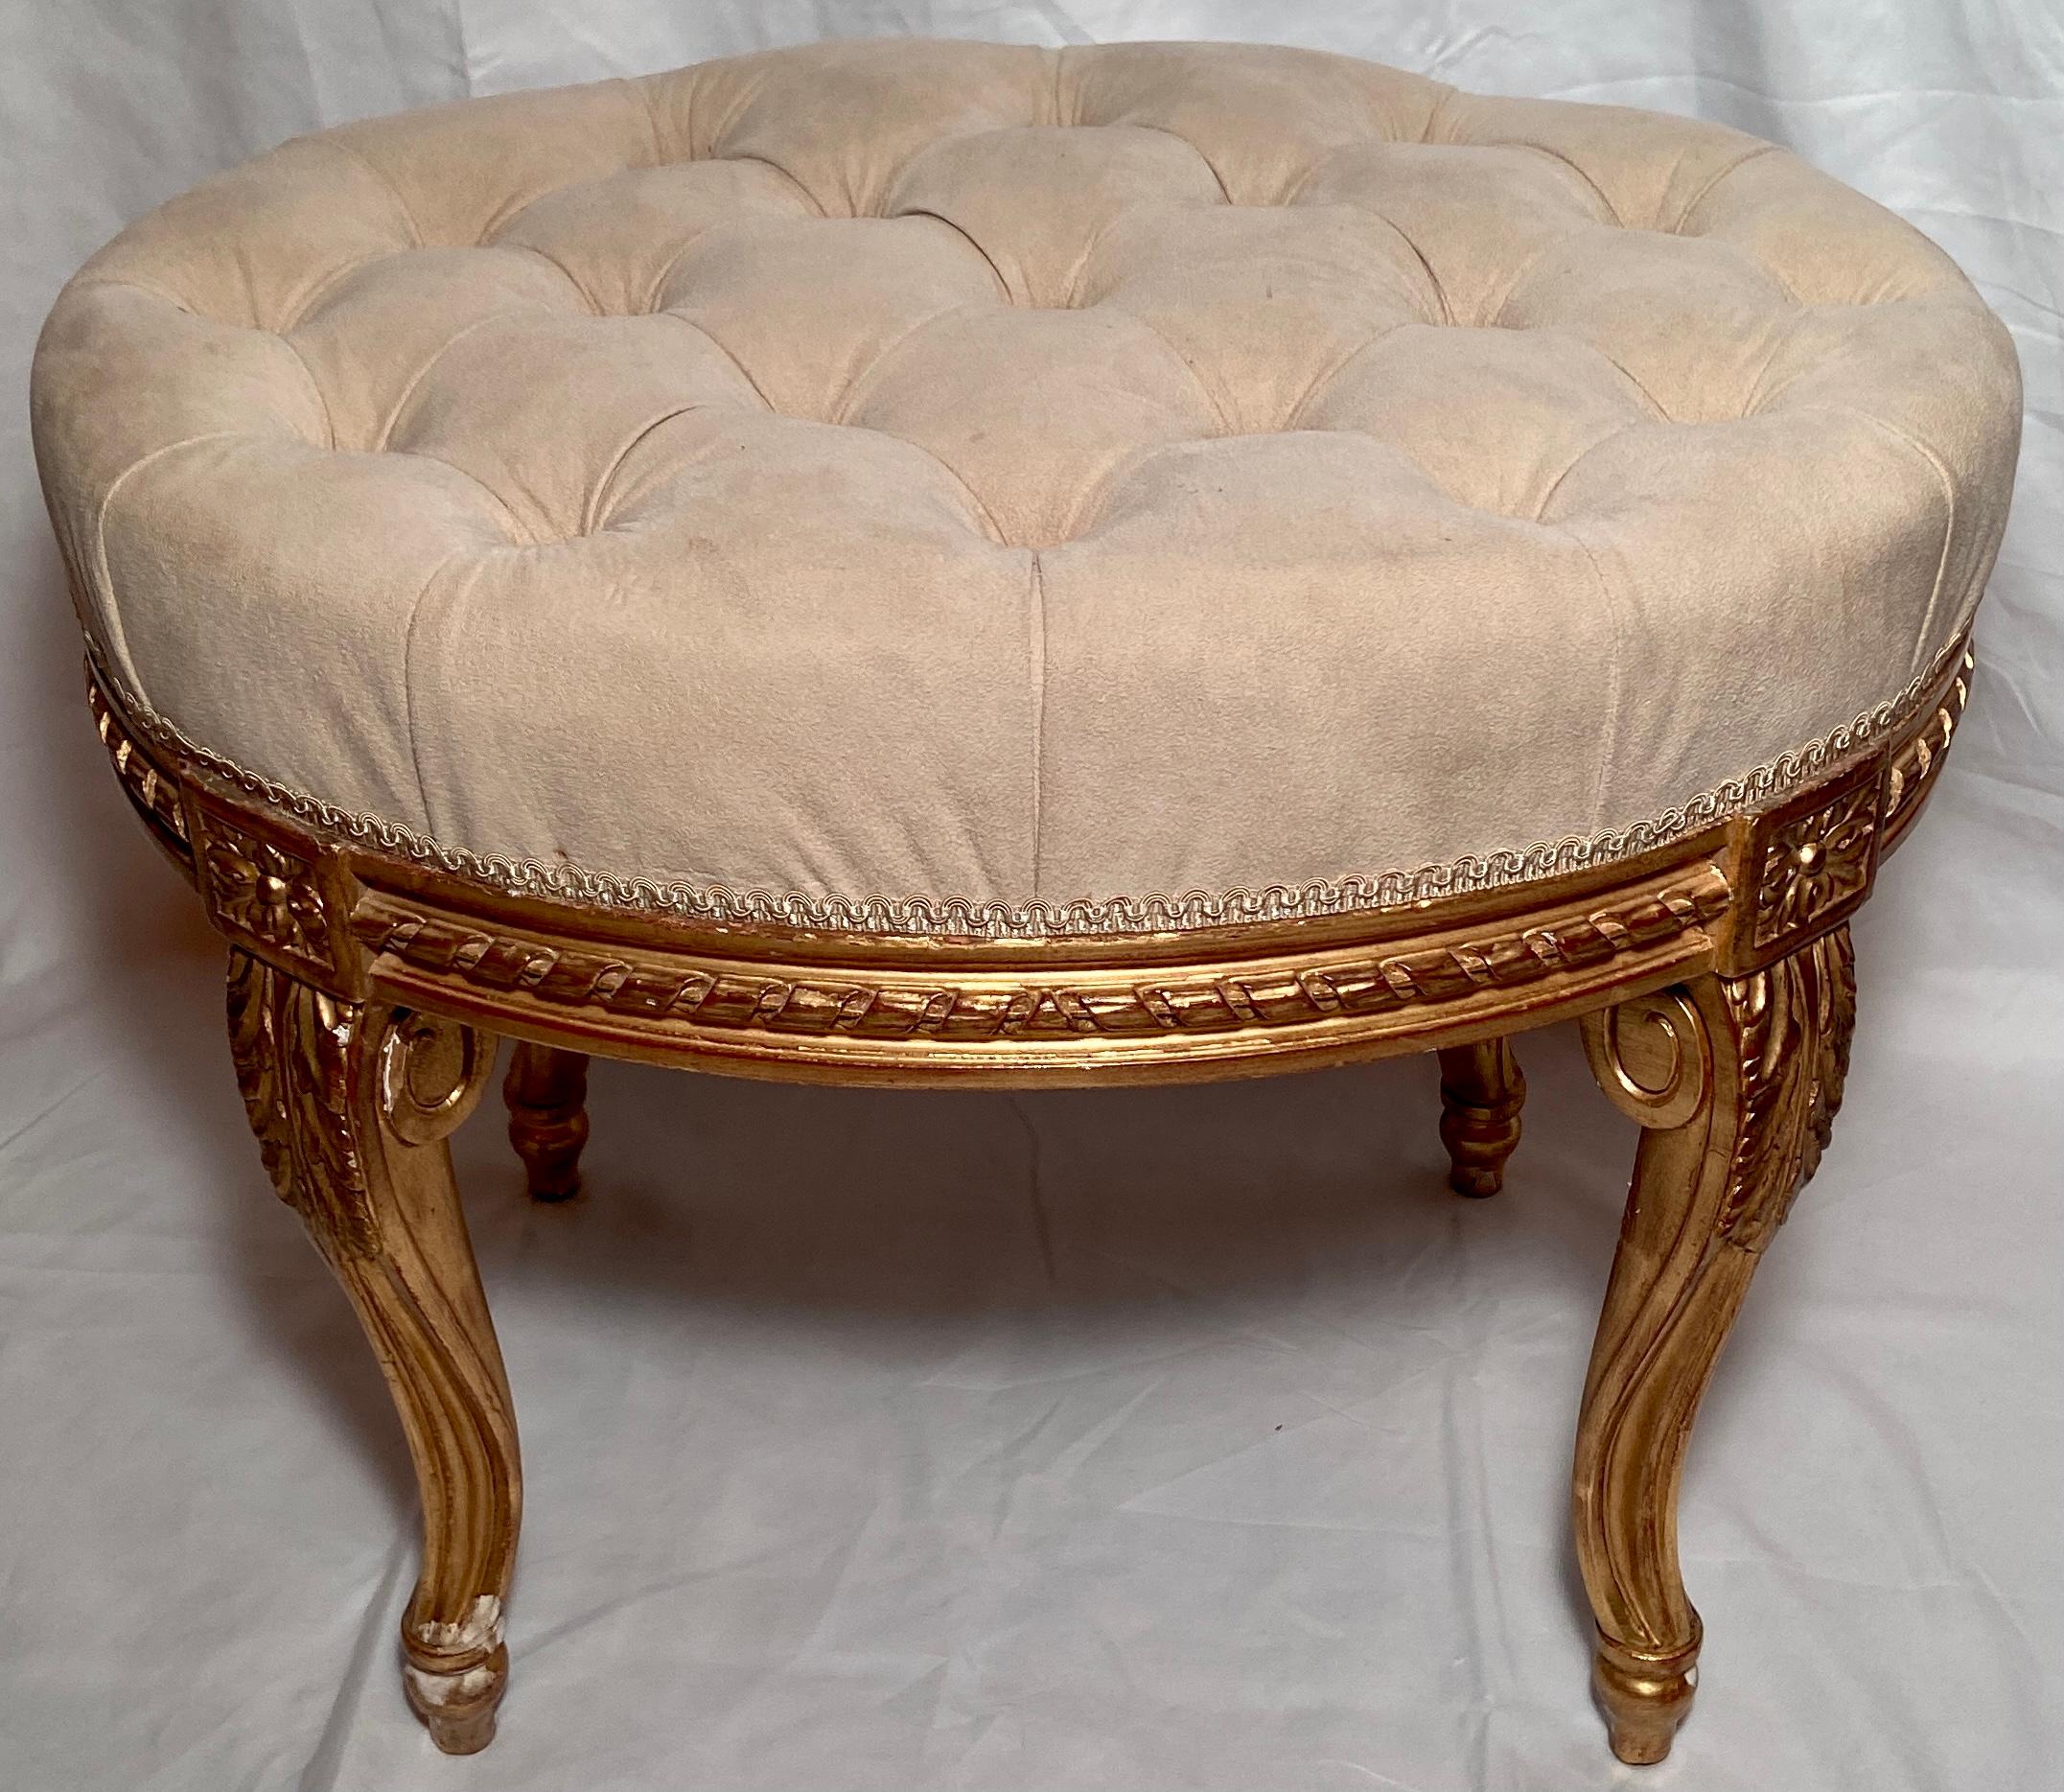 Antique French Louis XVI gold leaf bench, circa 1890.
A very lovely beige upholstered bench of a useful size.